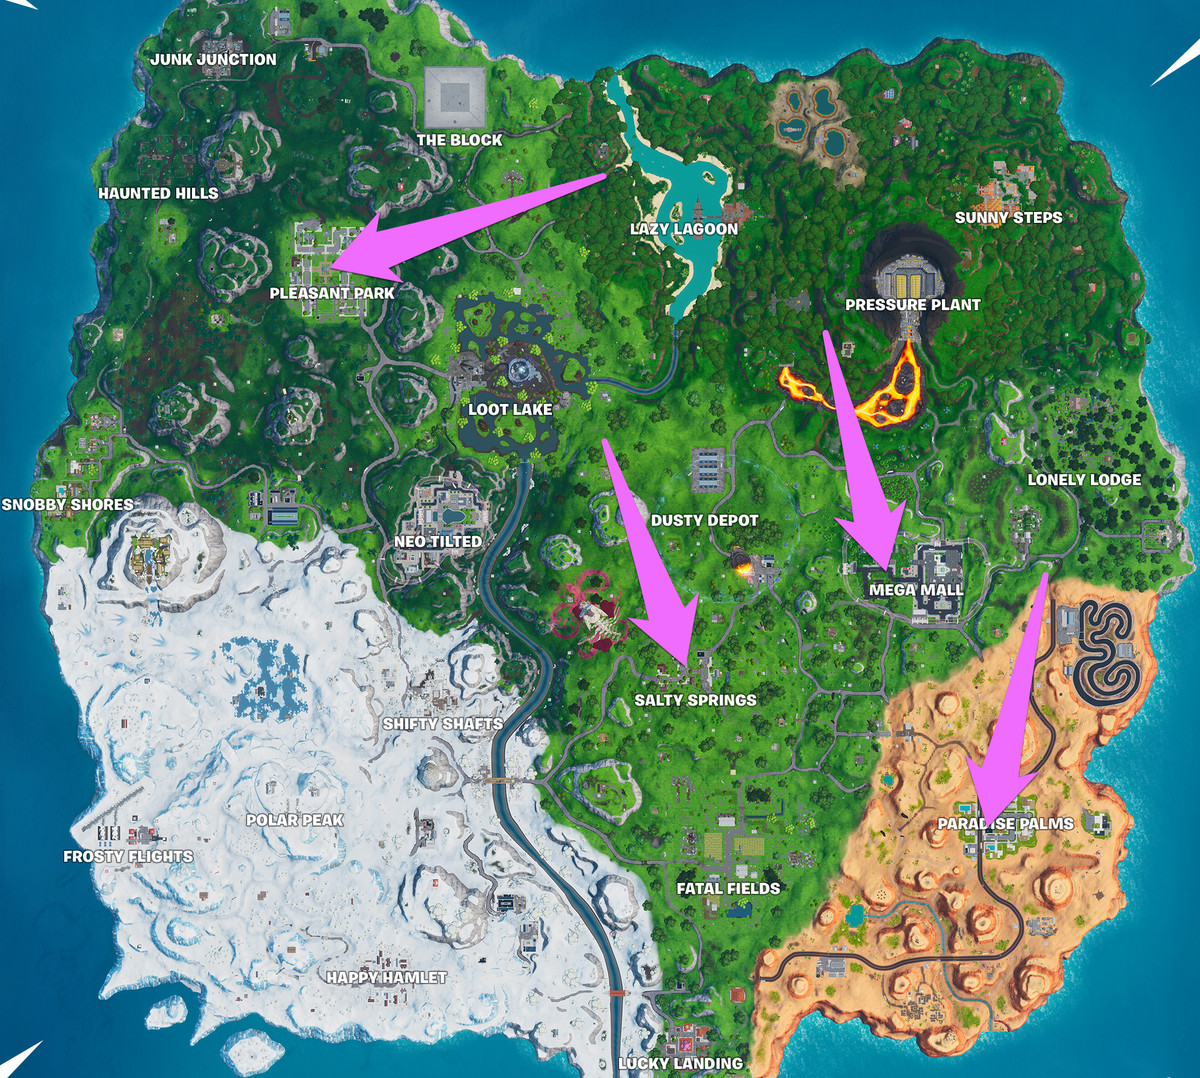 Fortnite cities that have stop signs marked on the Fortnite map 